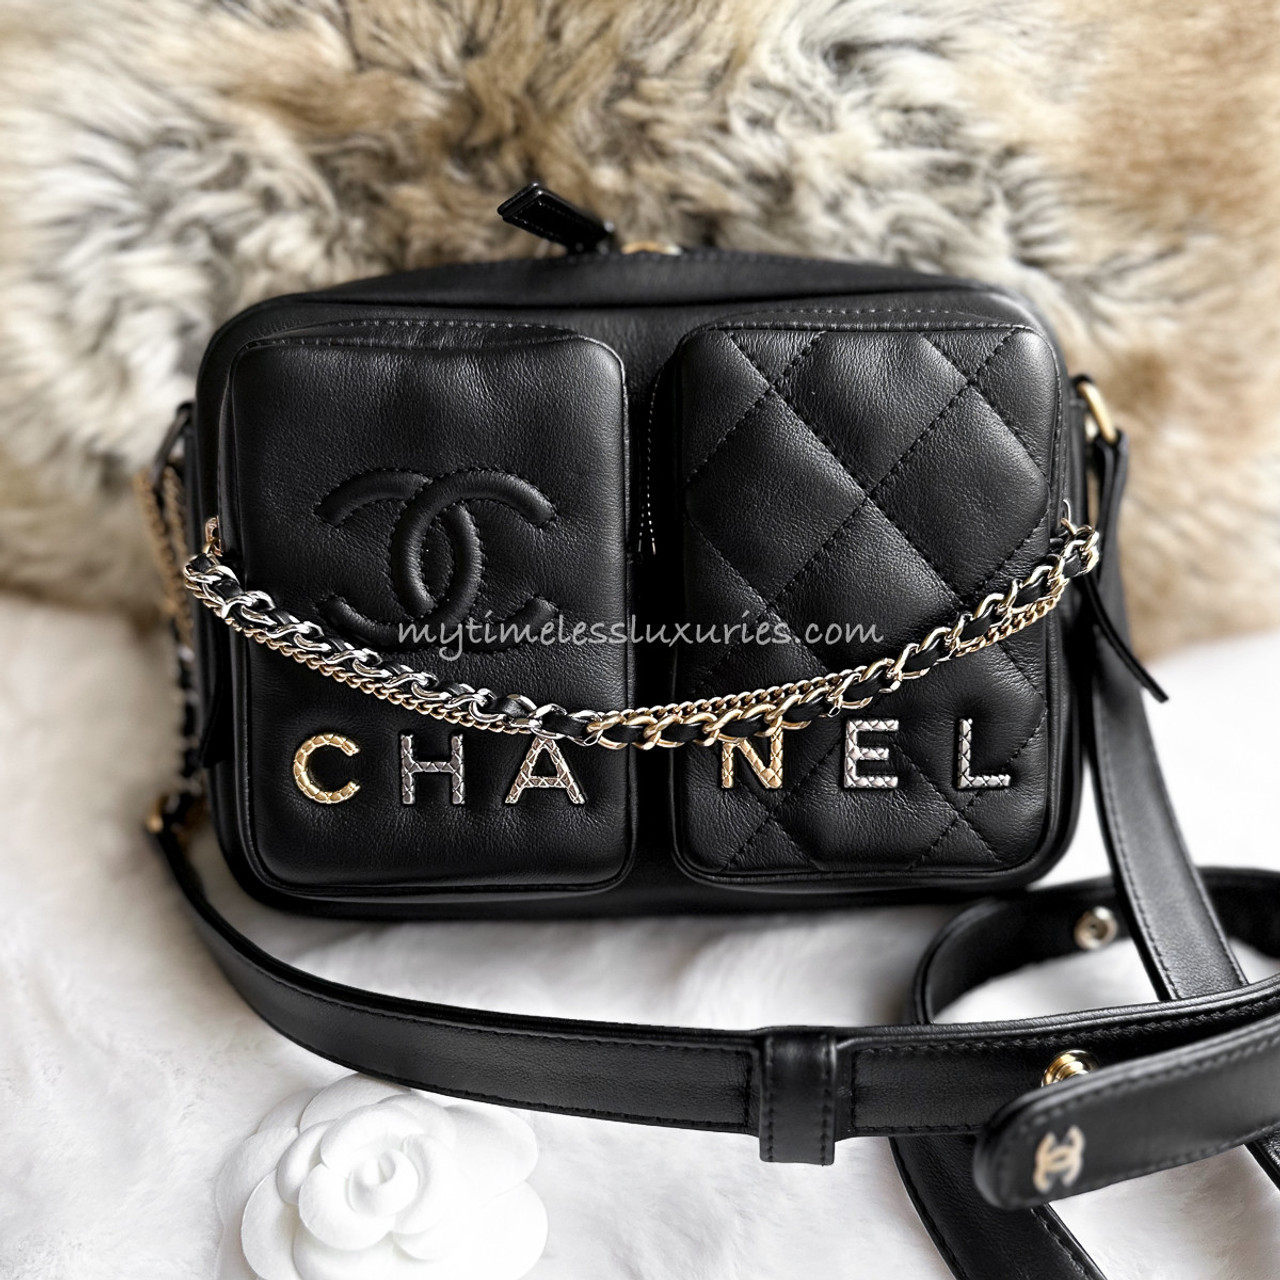 CHANEL 23P Logo Camera Bag Chain Details *New - Timeless Luxuries